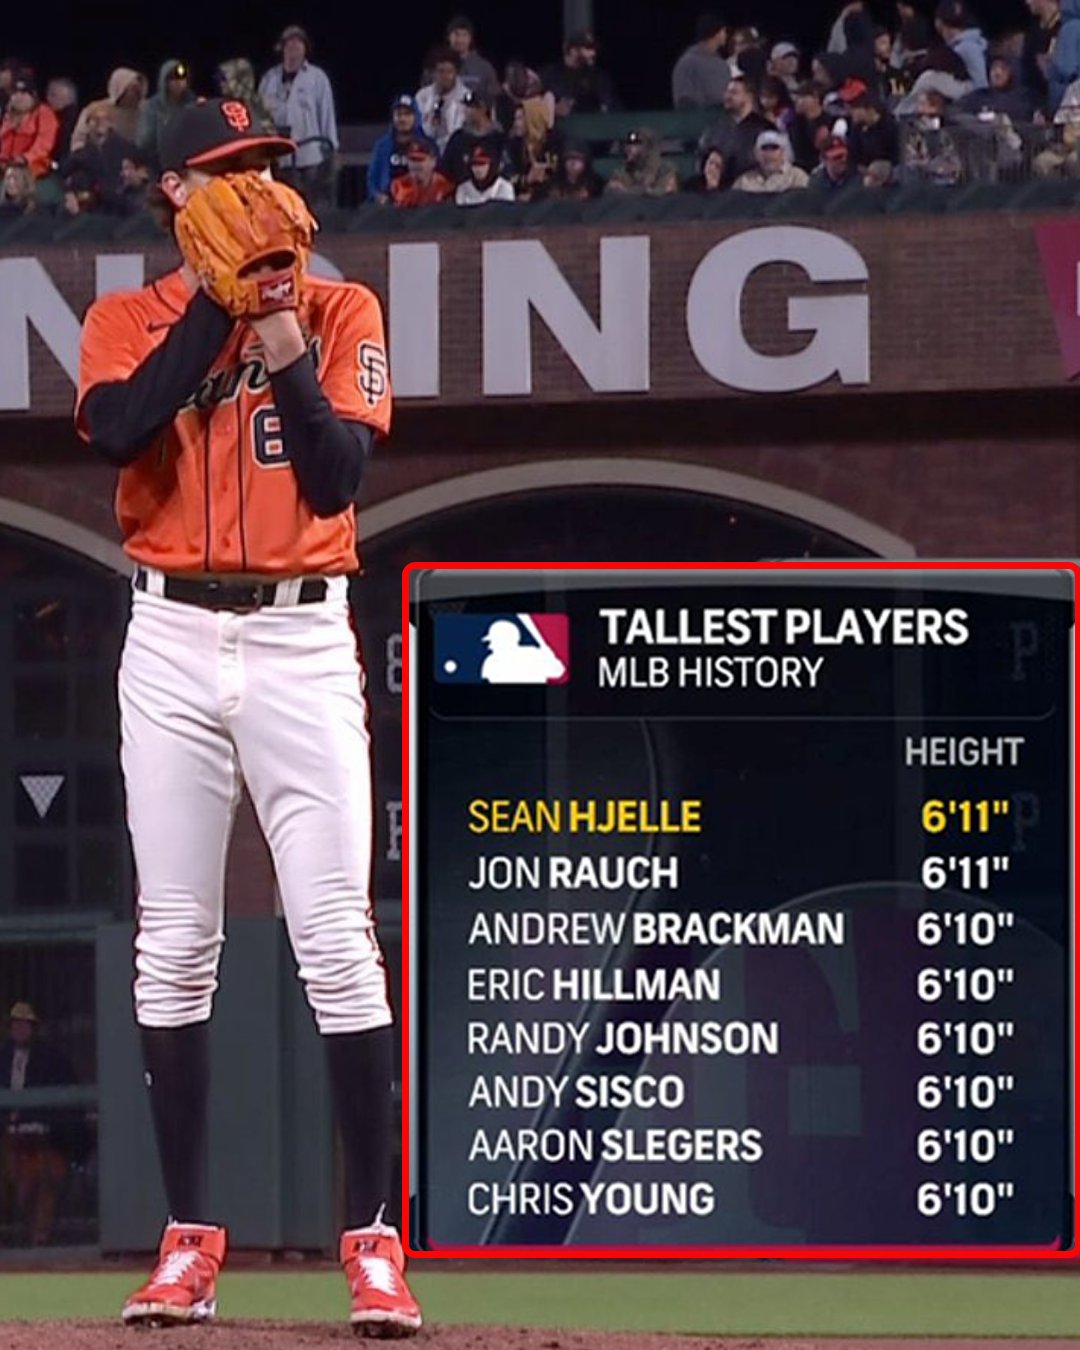 Tallest player in MLB history makes debut